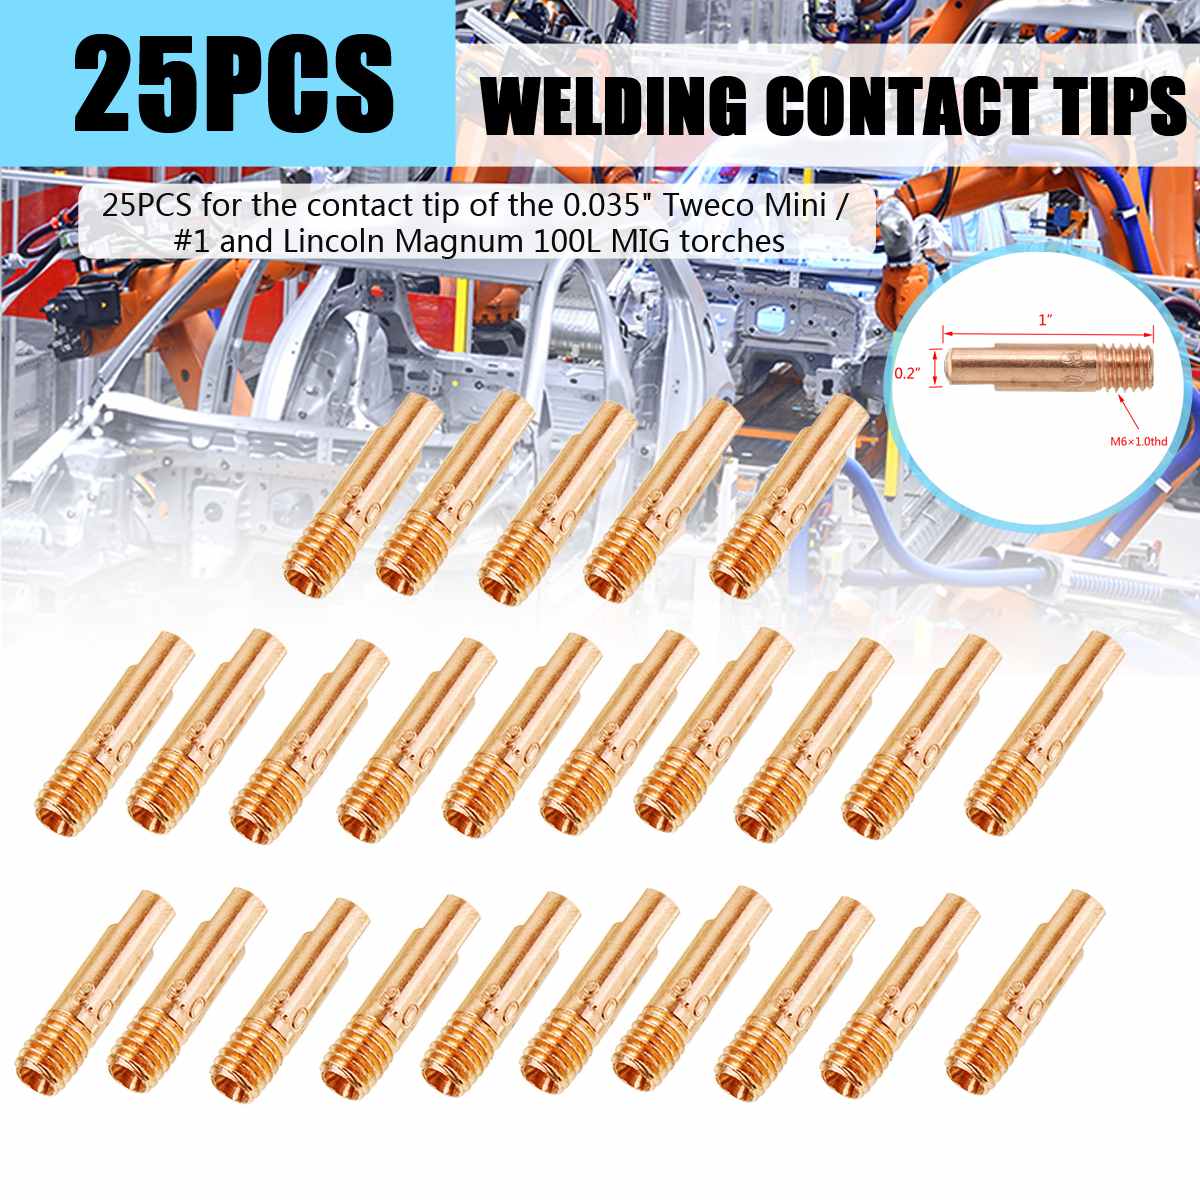 25Pcs Brass Welding Torch Contact Tip Gas Nozzle For 0.035" Tweco Mini #1 and For Lincoln Magnum 100L MIG Torches